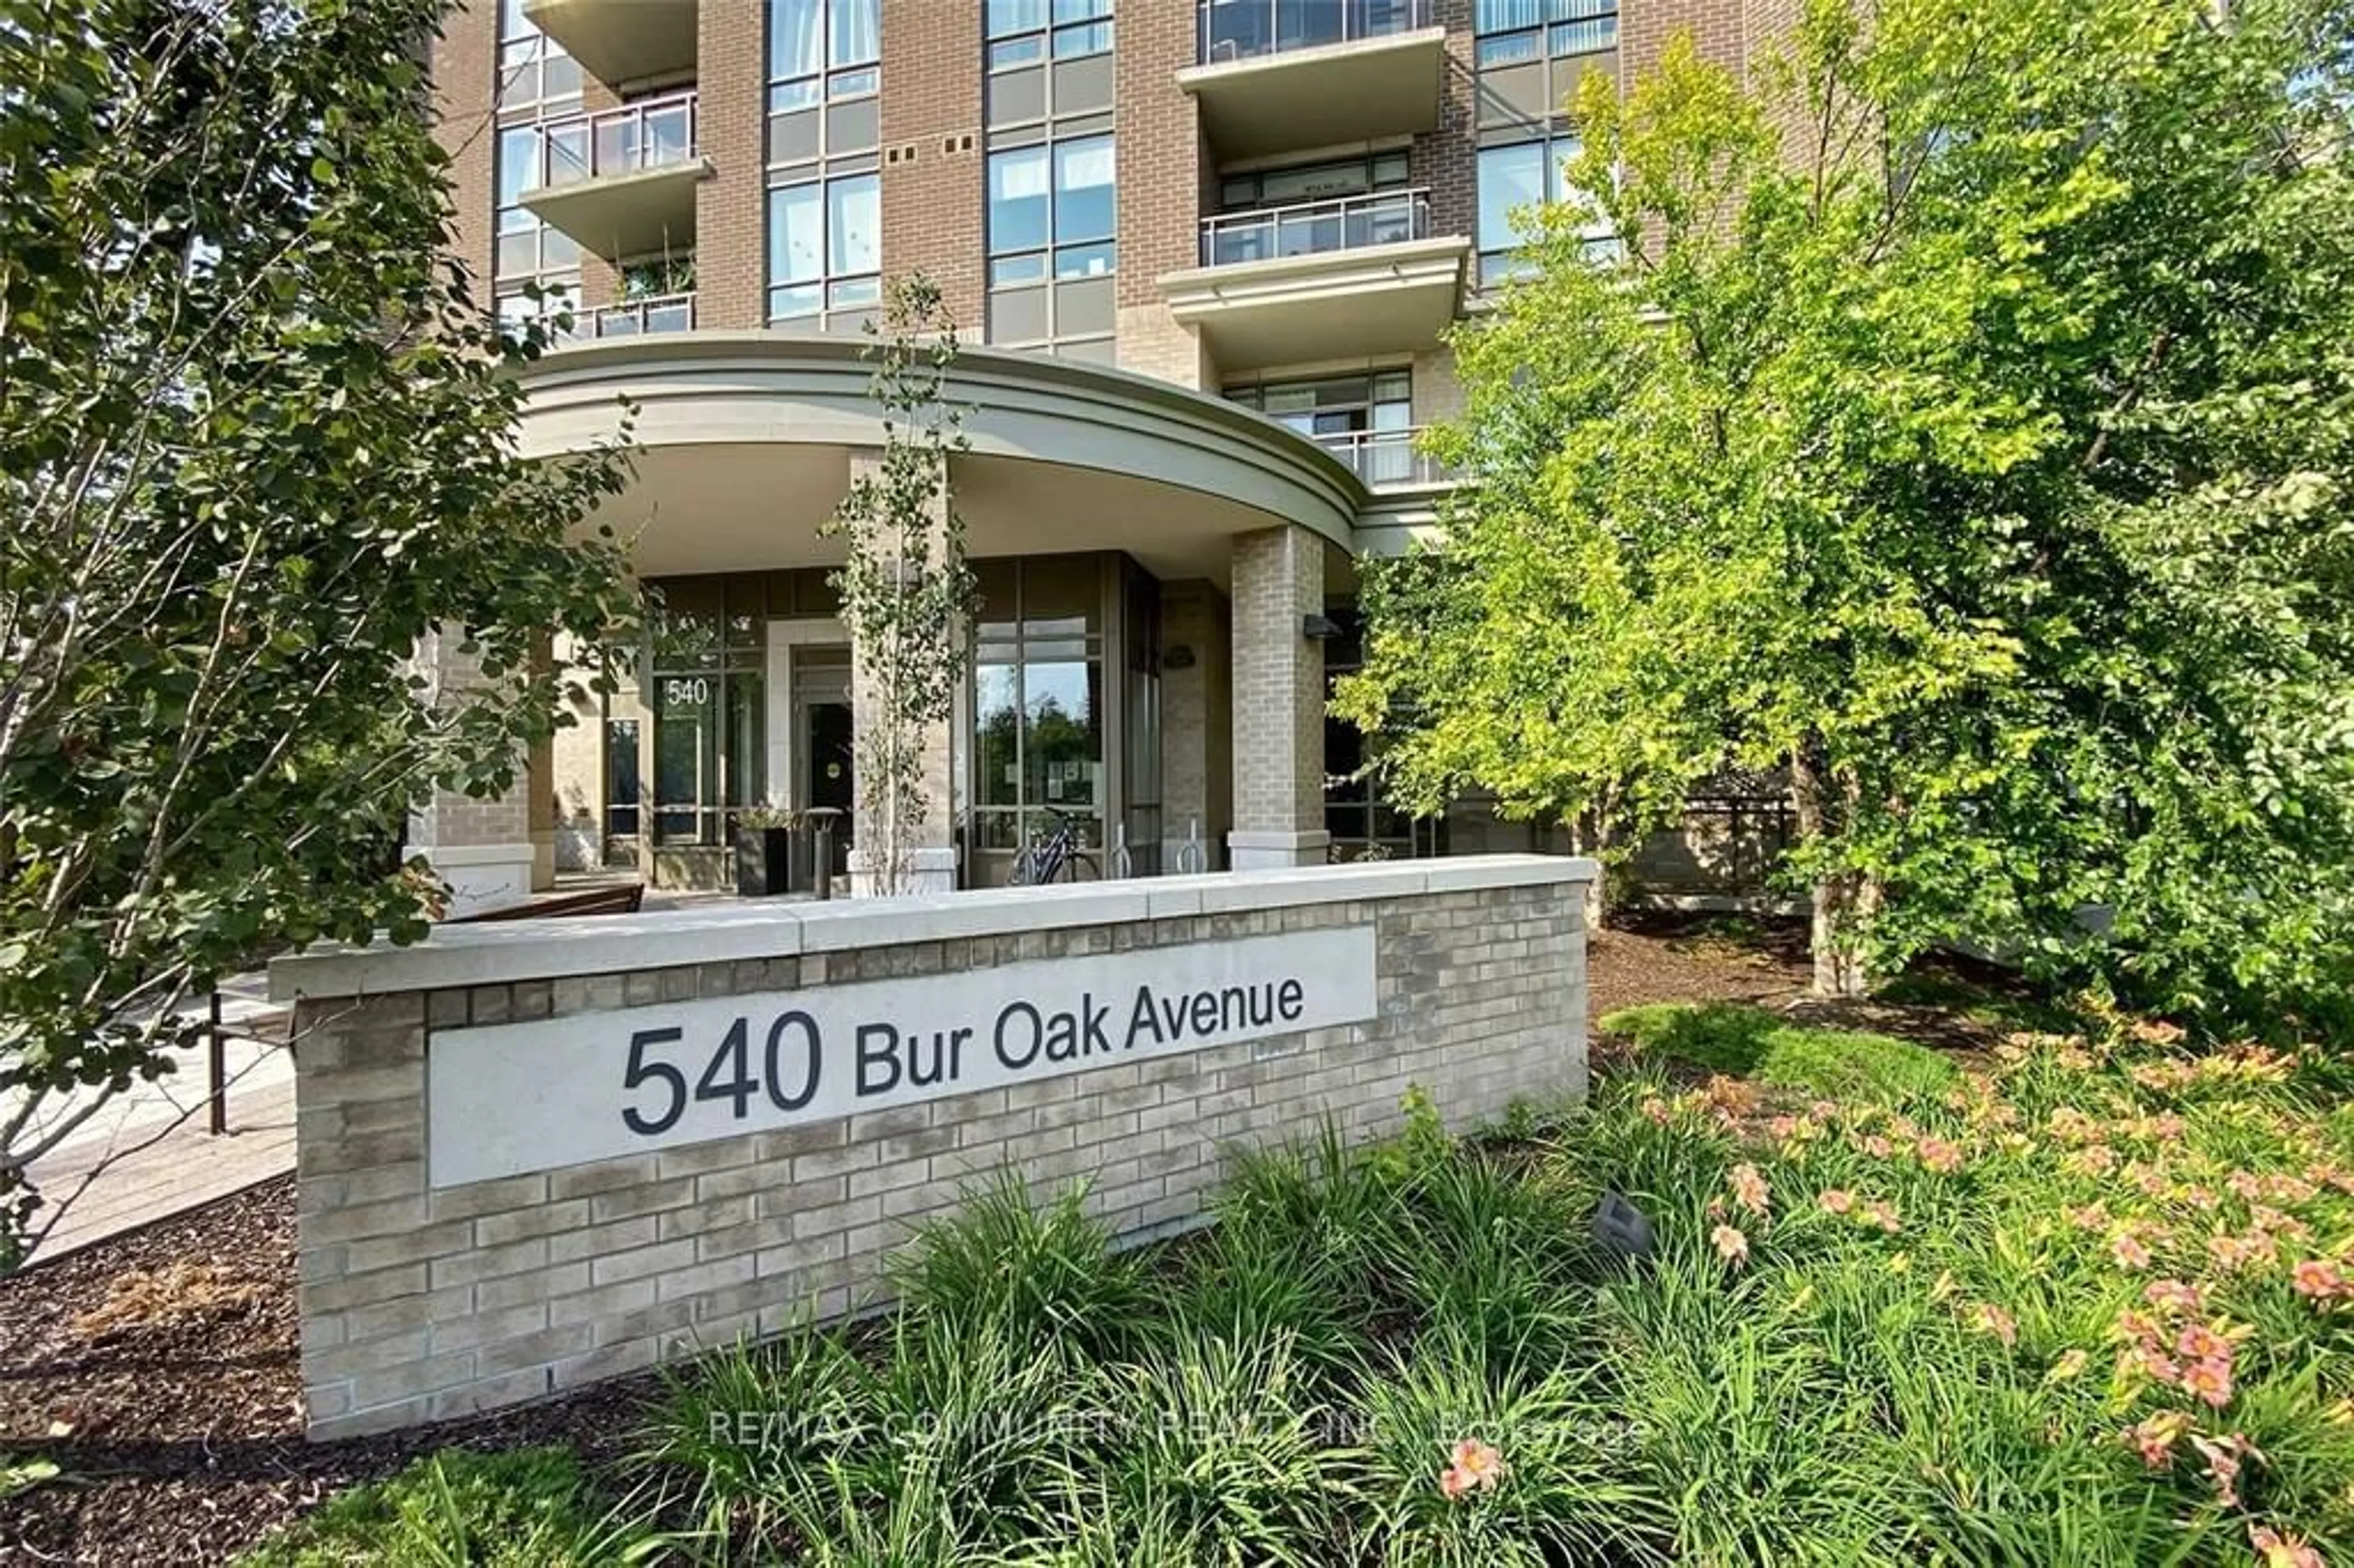 A pic from exterior of the house or condo for 540 Bur Oak Ave #235, Markham Ontario L6C 0Y2